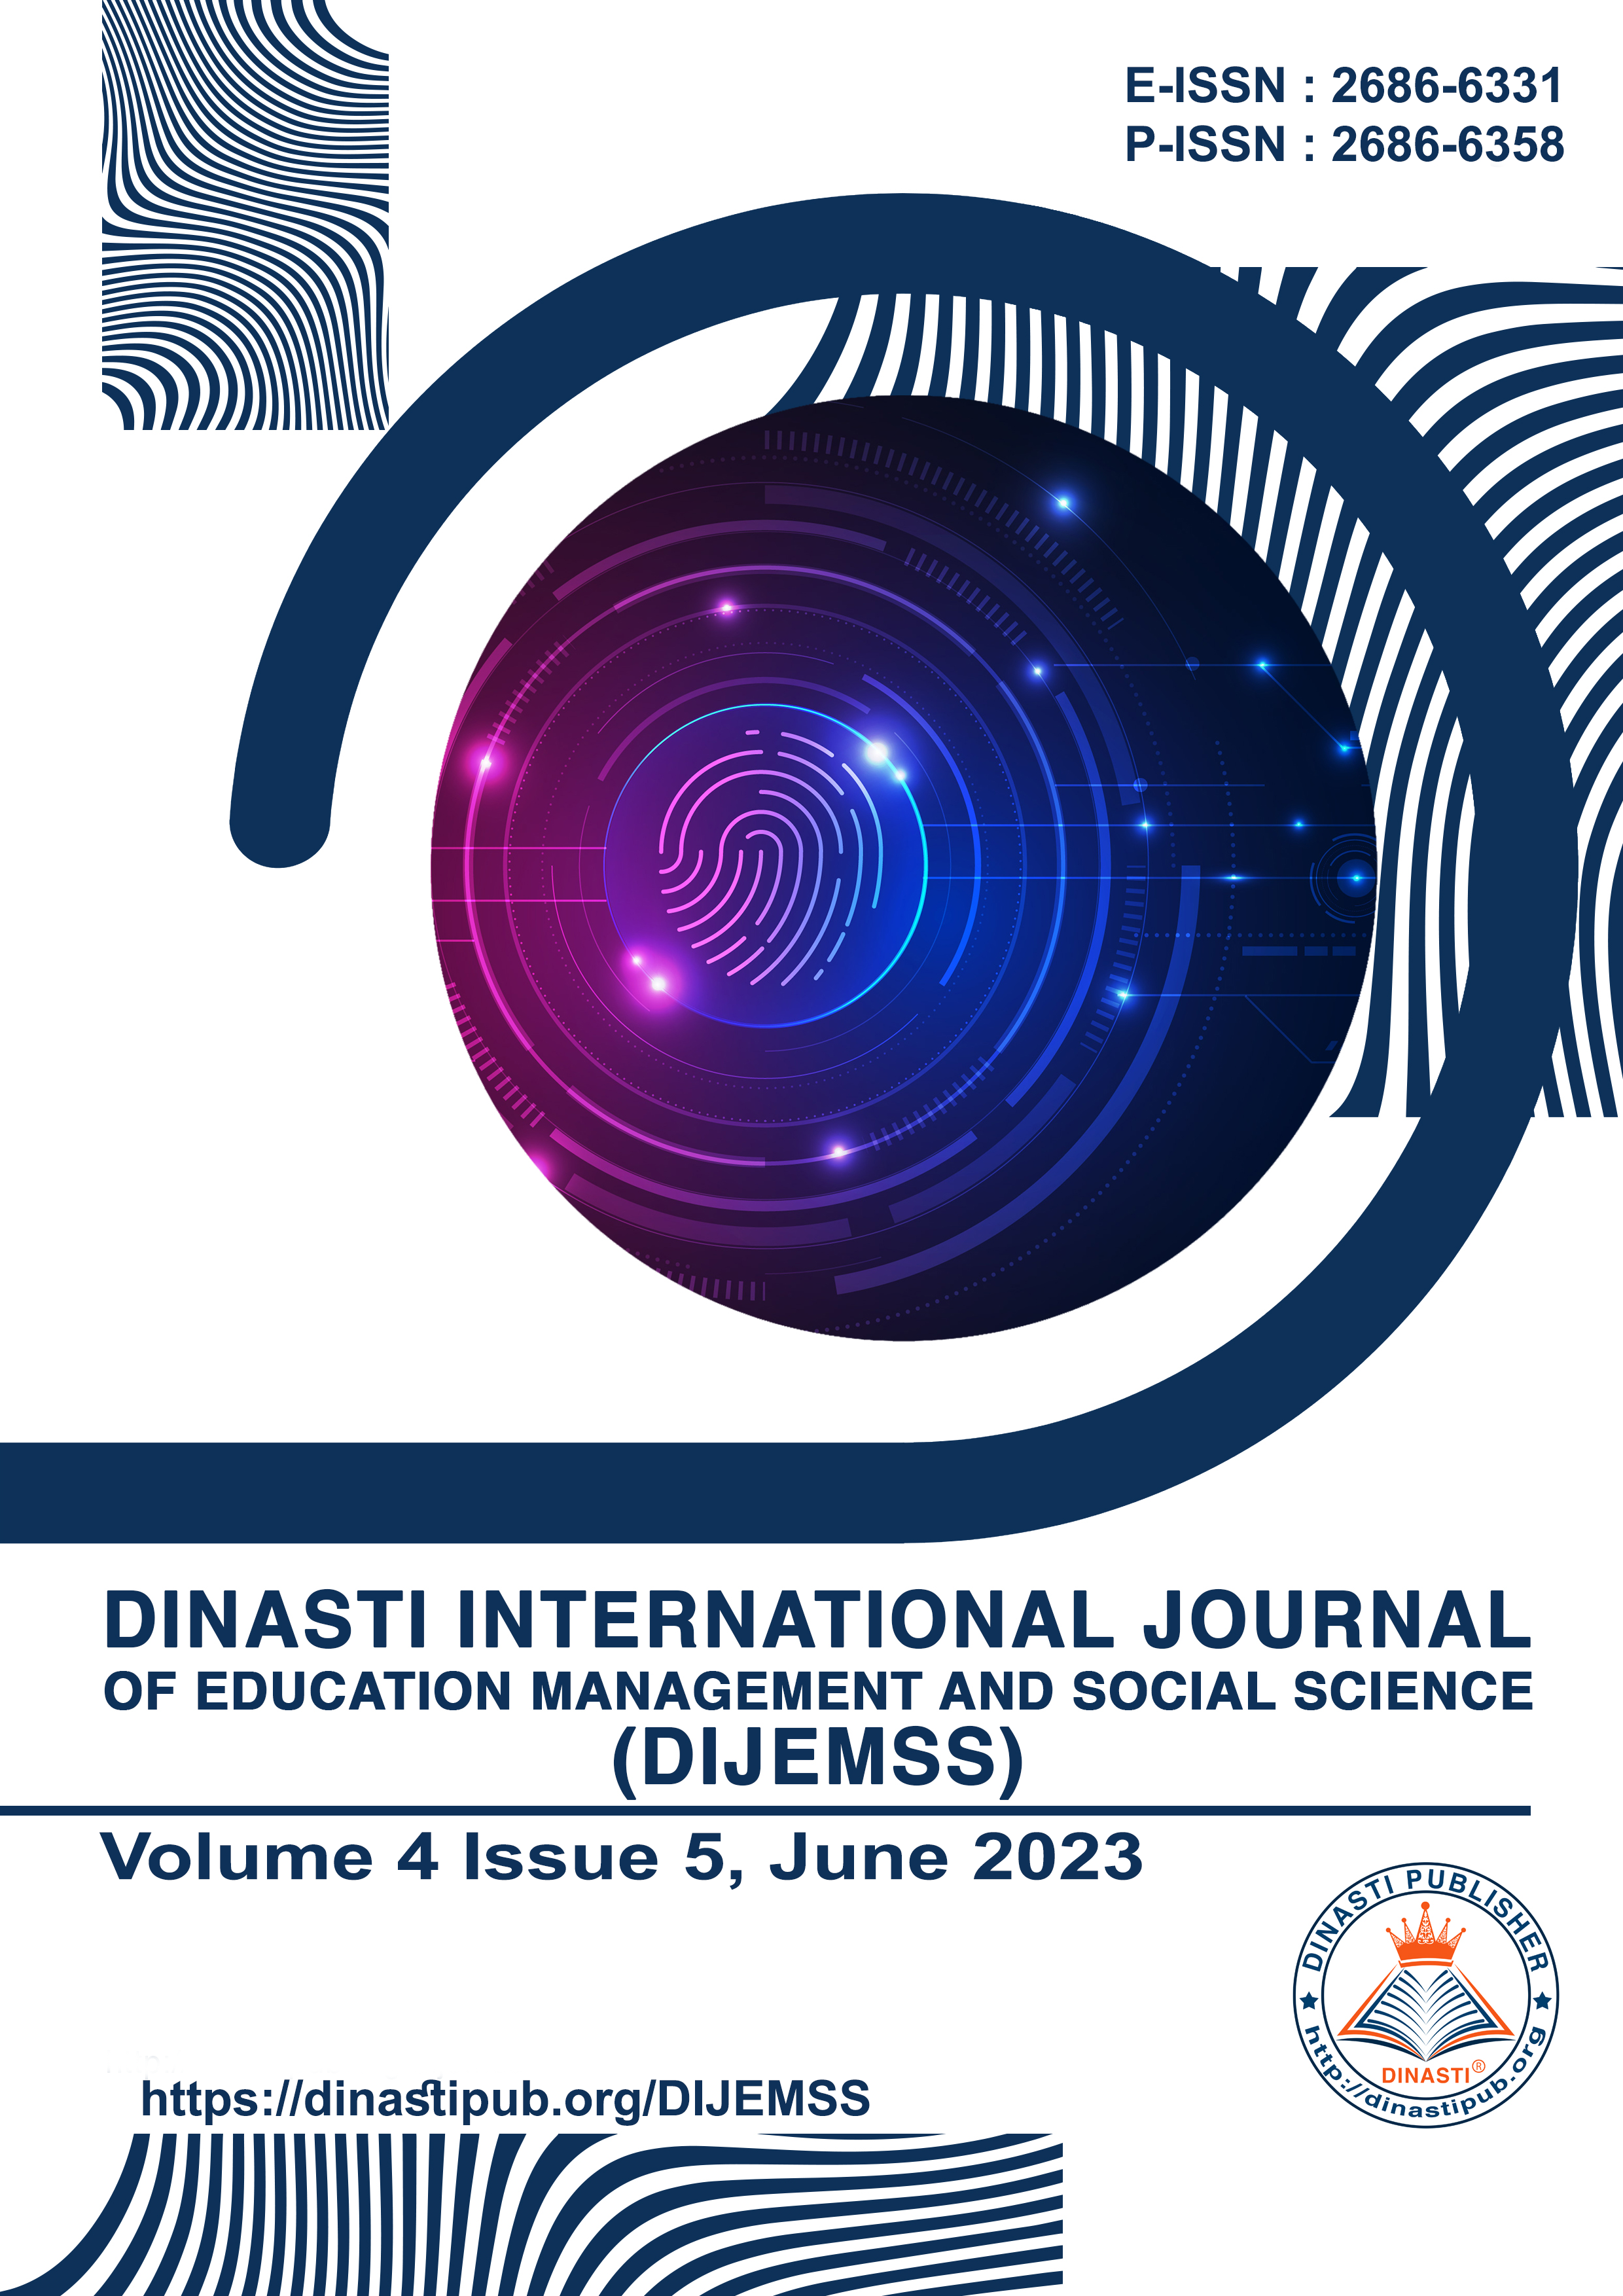 					View Vol. 4 No. 5 (2023): Dinasti International Journal of Education Management and Social Science (June - July 2023)
				